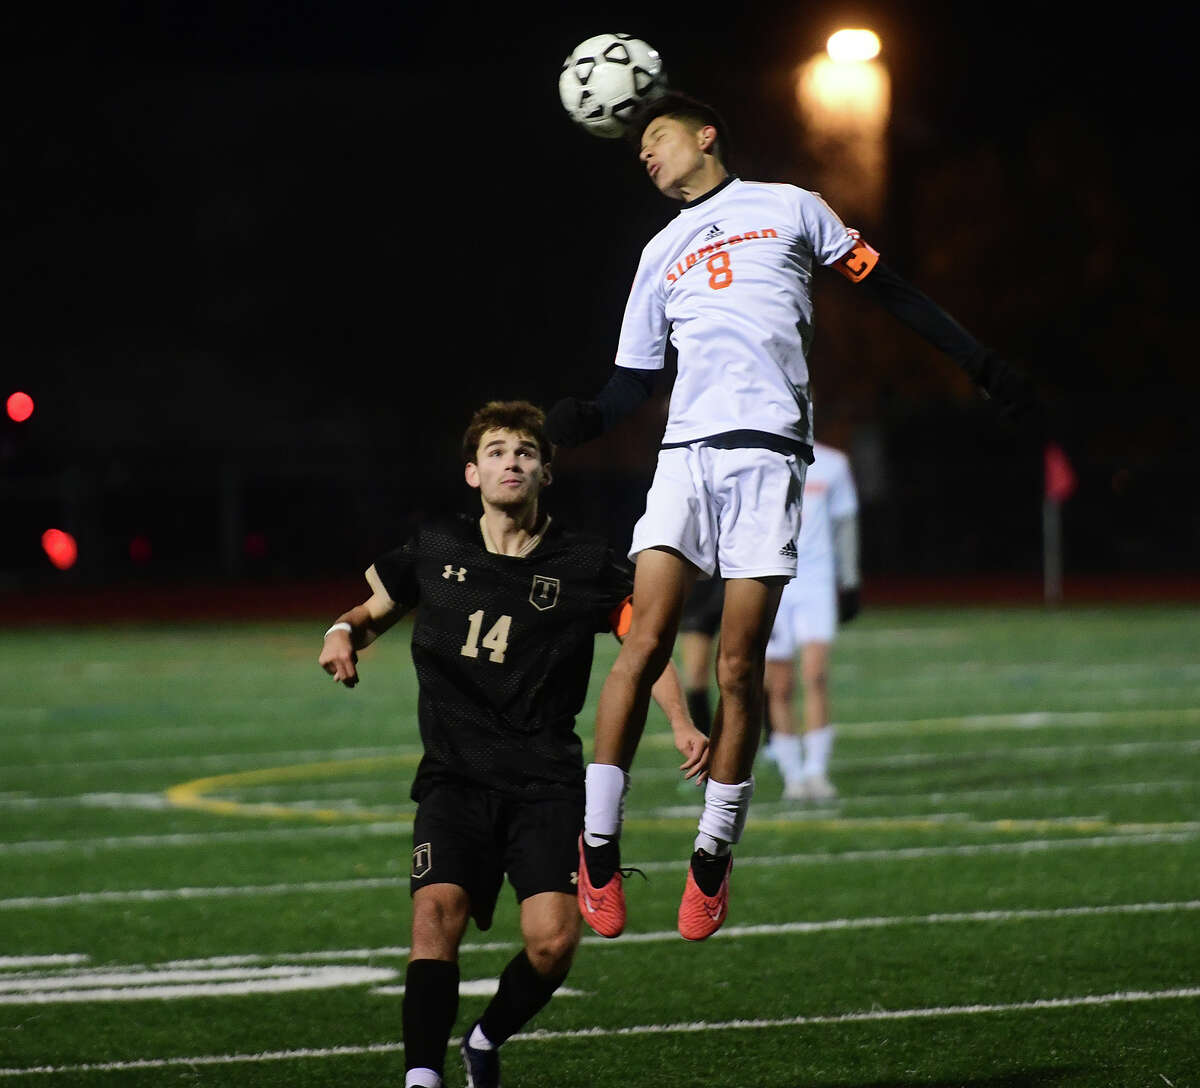 Stamford boys soccer in FCIAC championship, first time since 1997